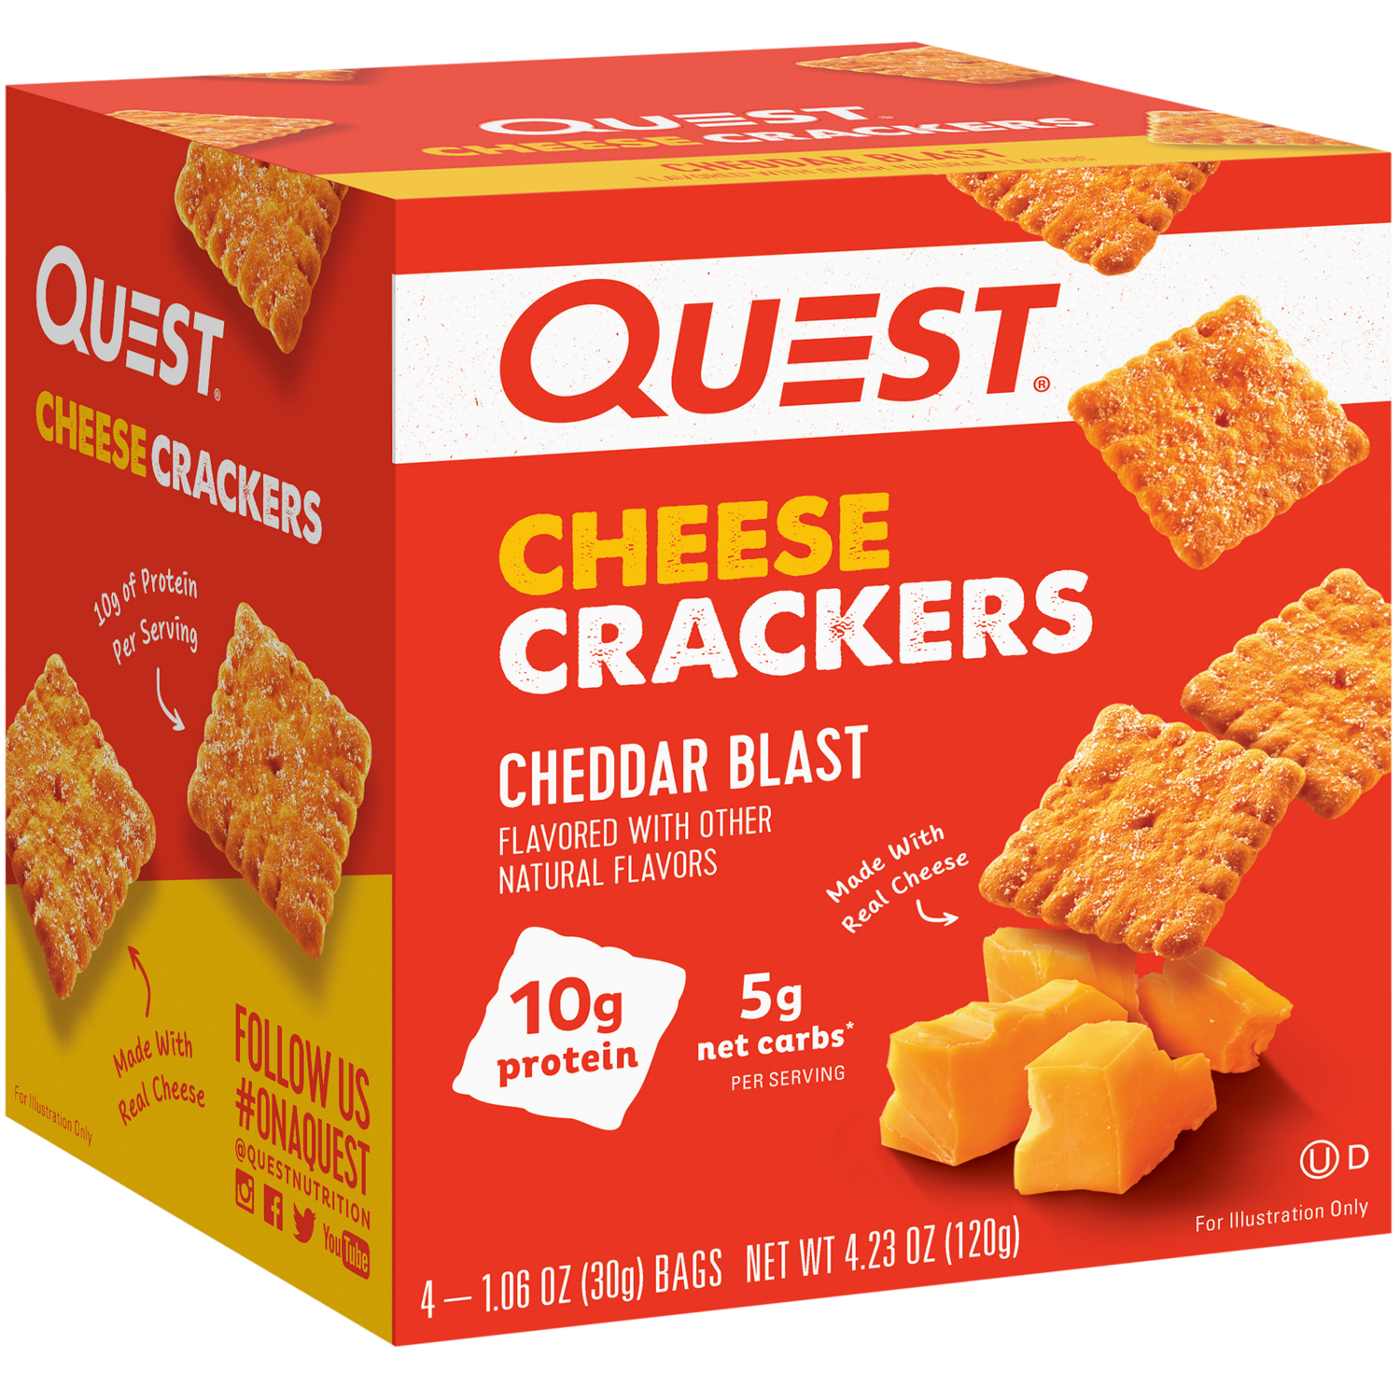 Quest Cheese Crackers - Cheddar Blast; image 1 of 2